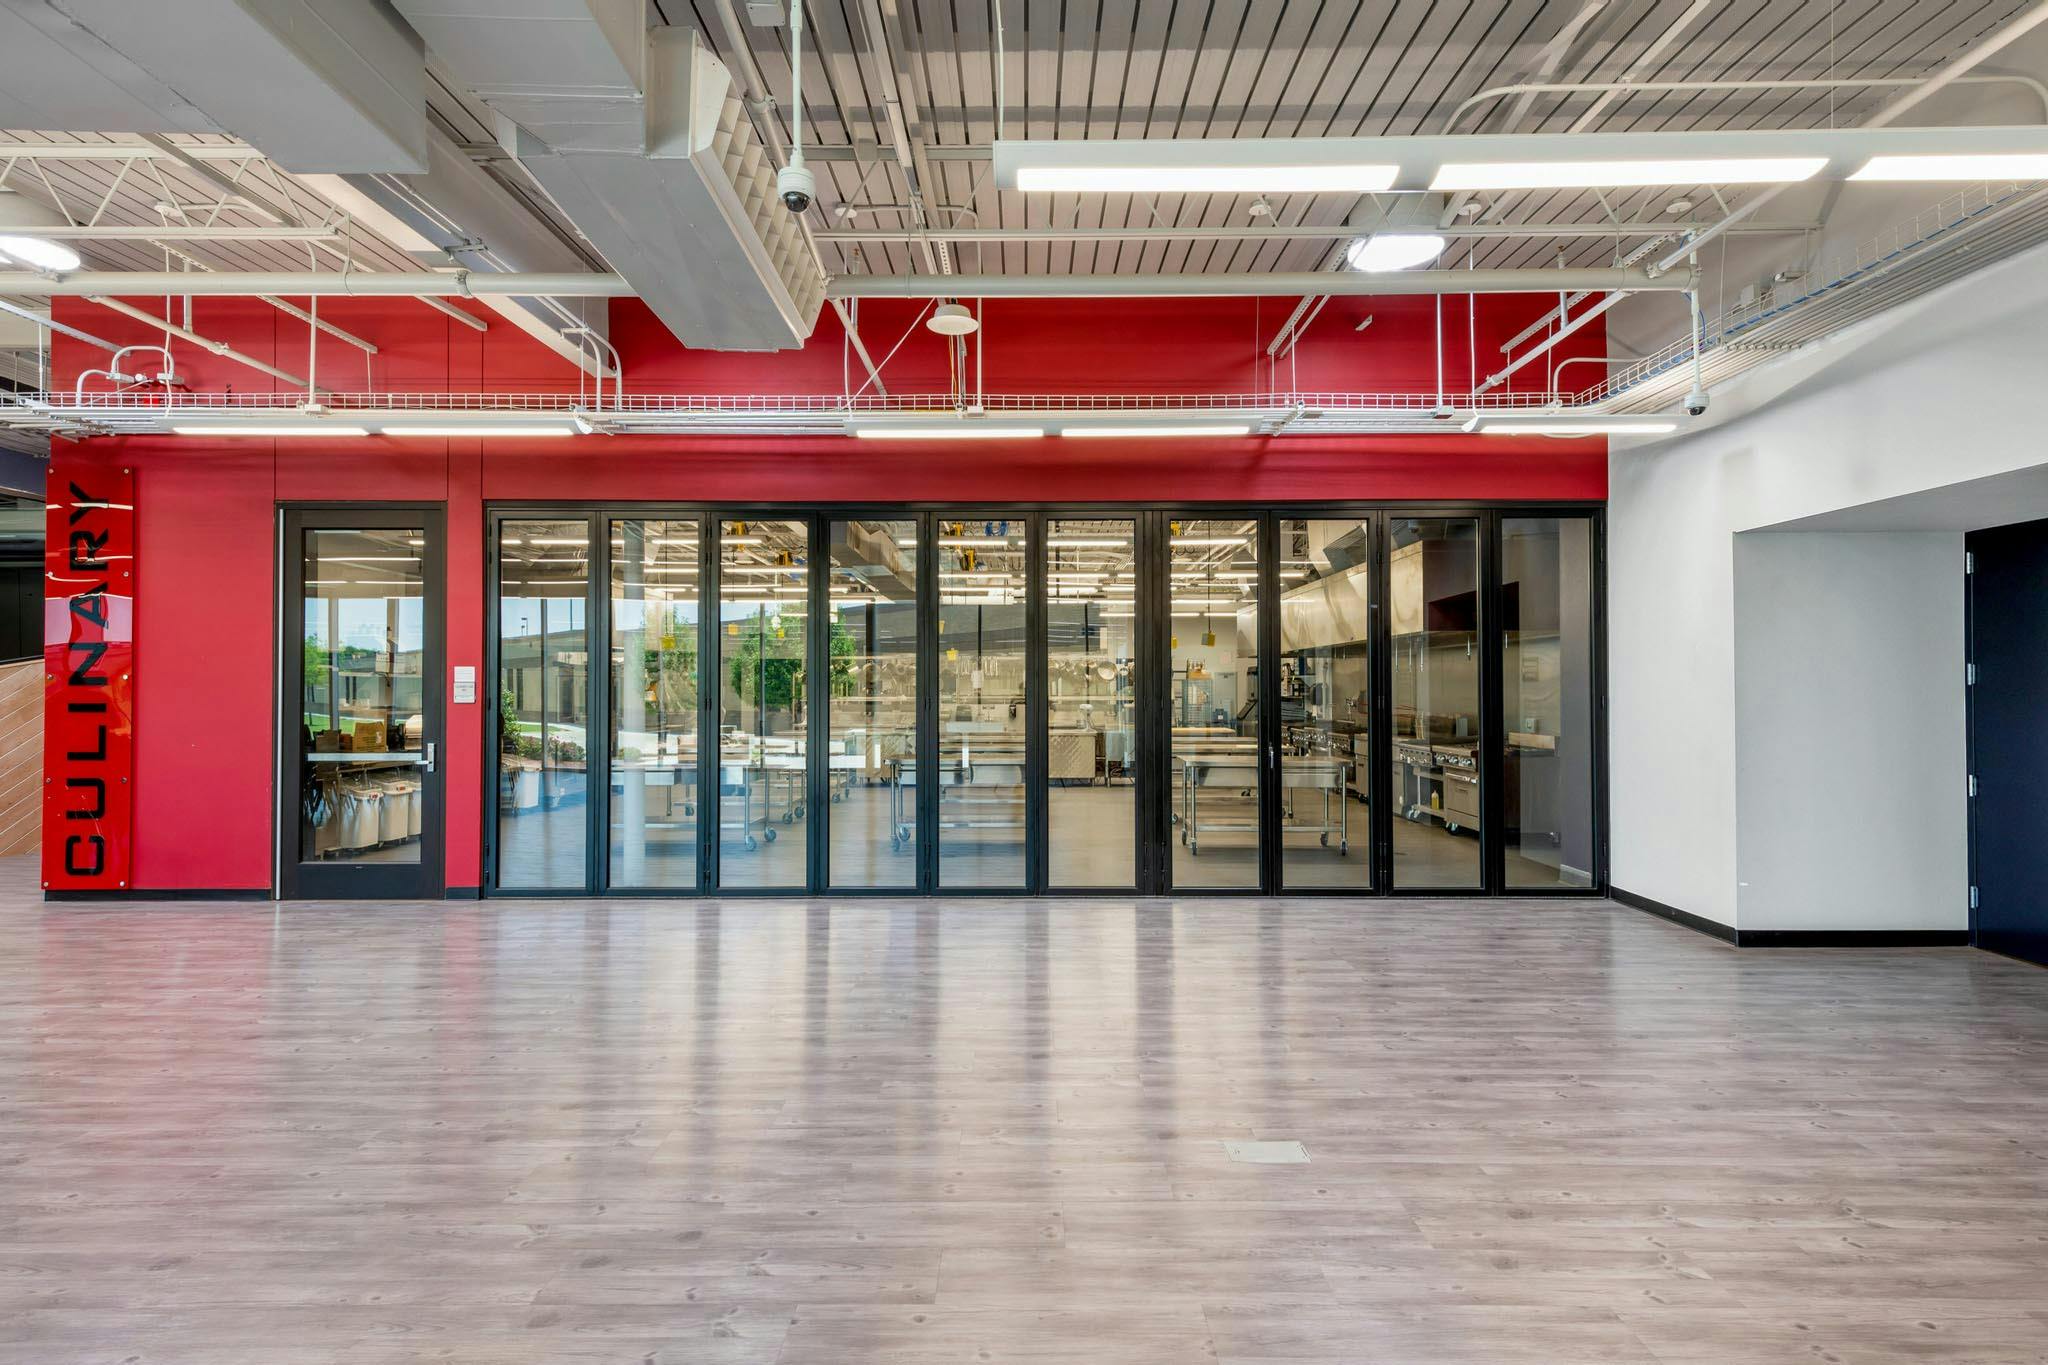 Lubbock culinary career center with closed folding glass walls